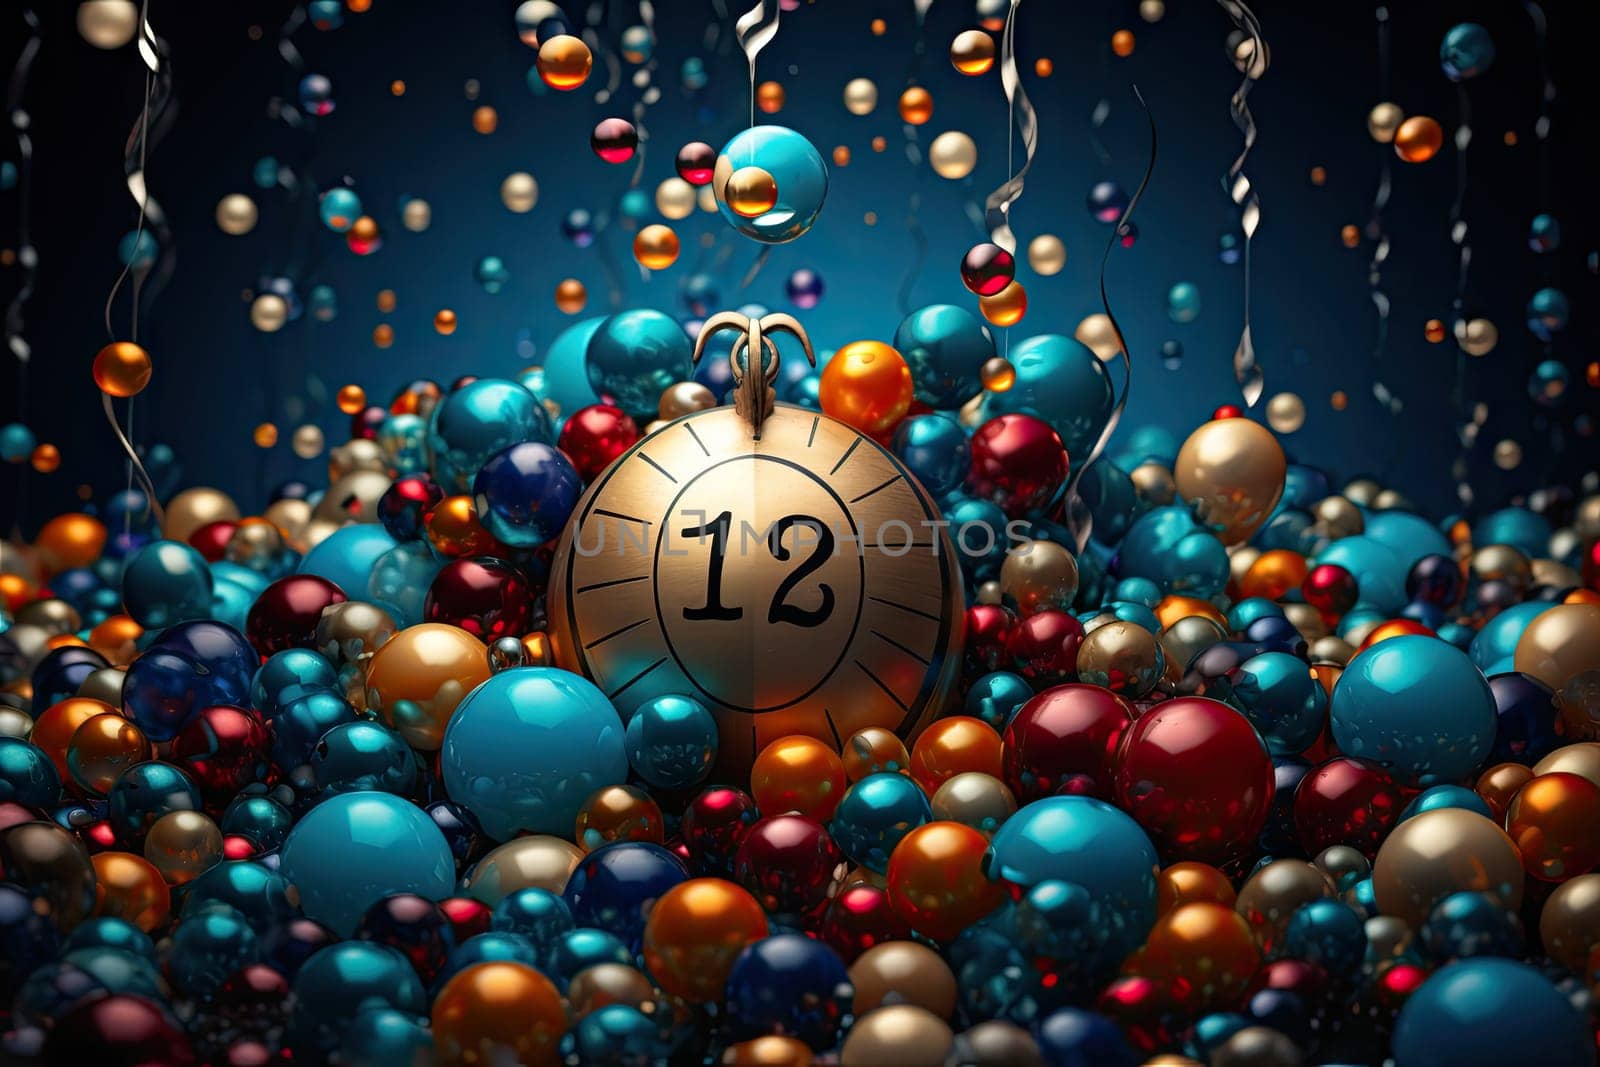 an abstract background with a clock and colorful balls by golibtolibov